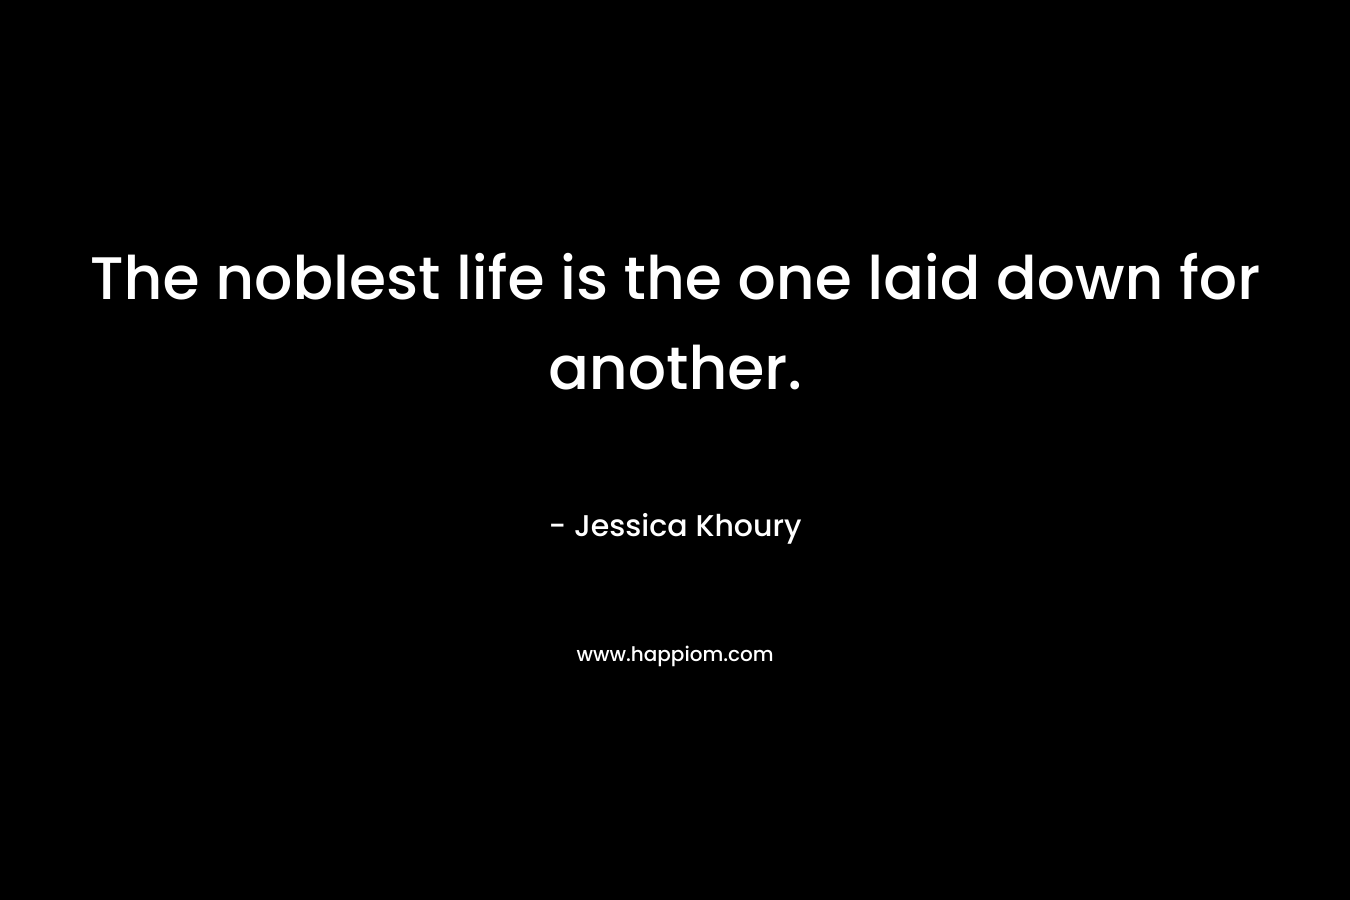 The noblest life is the one laid down for another. – Jessica Khoury